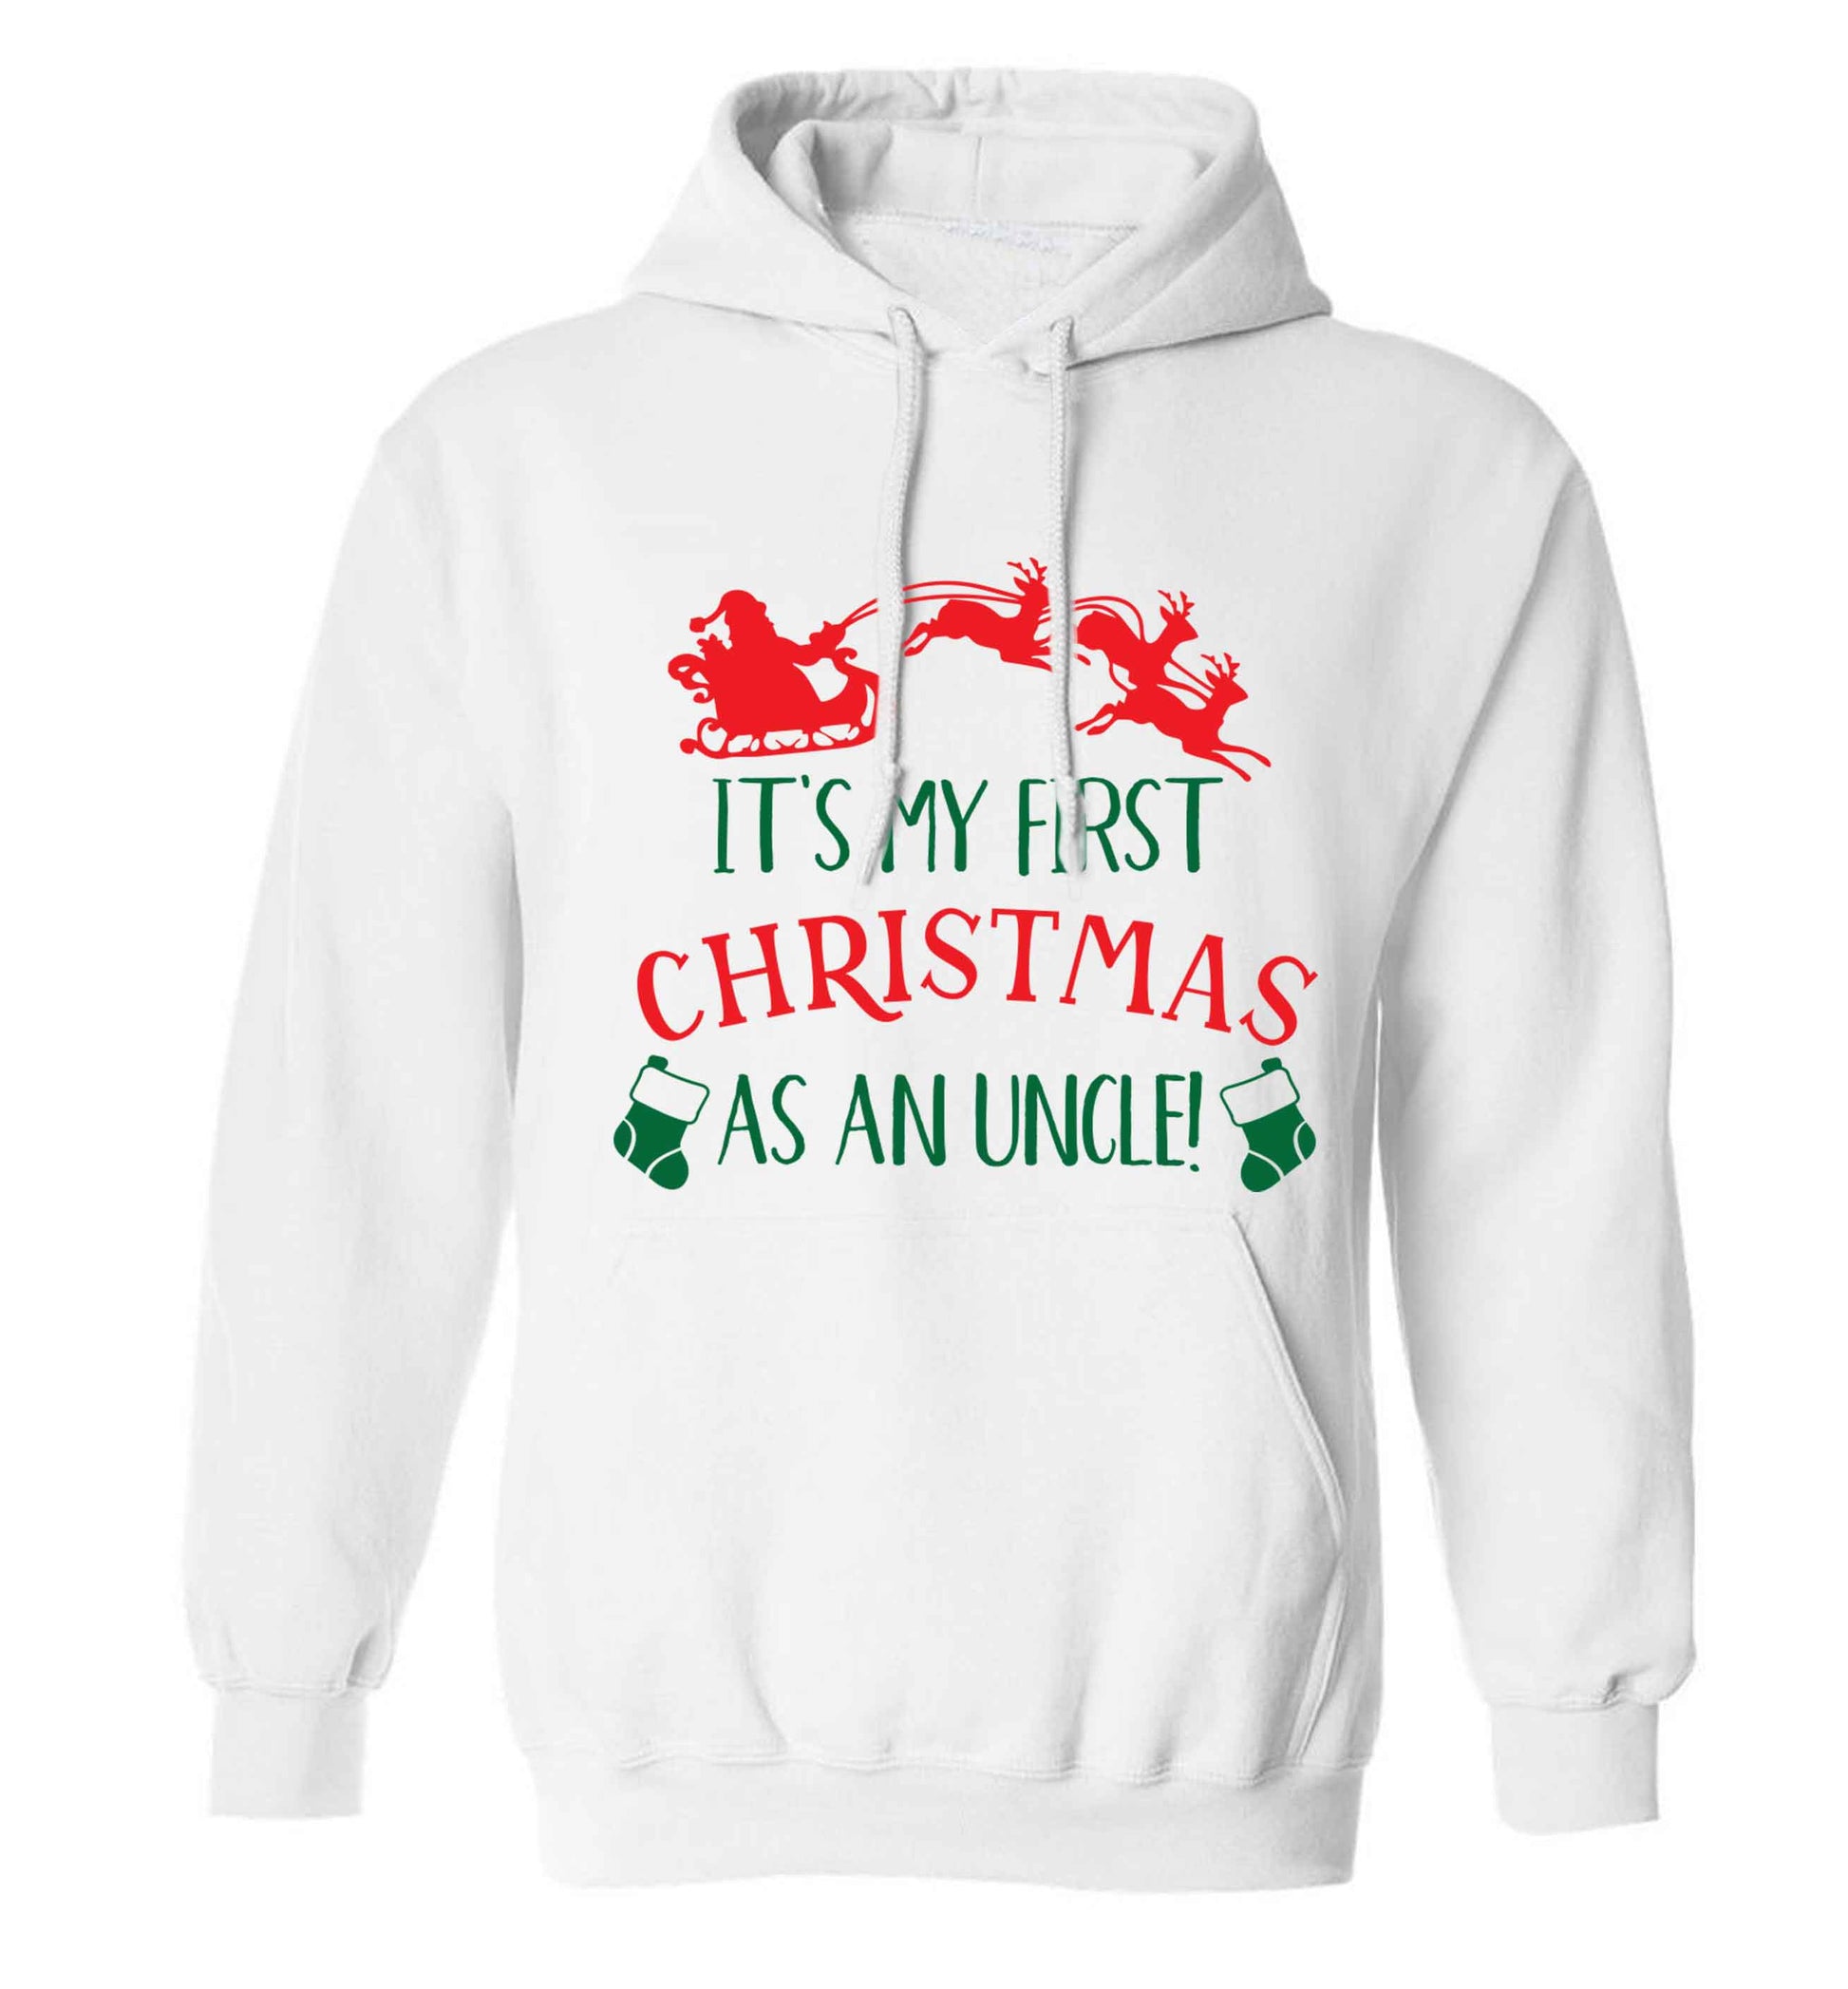 It's my first Christmas as an uncle! adults unisex white hoodie 2XL